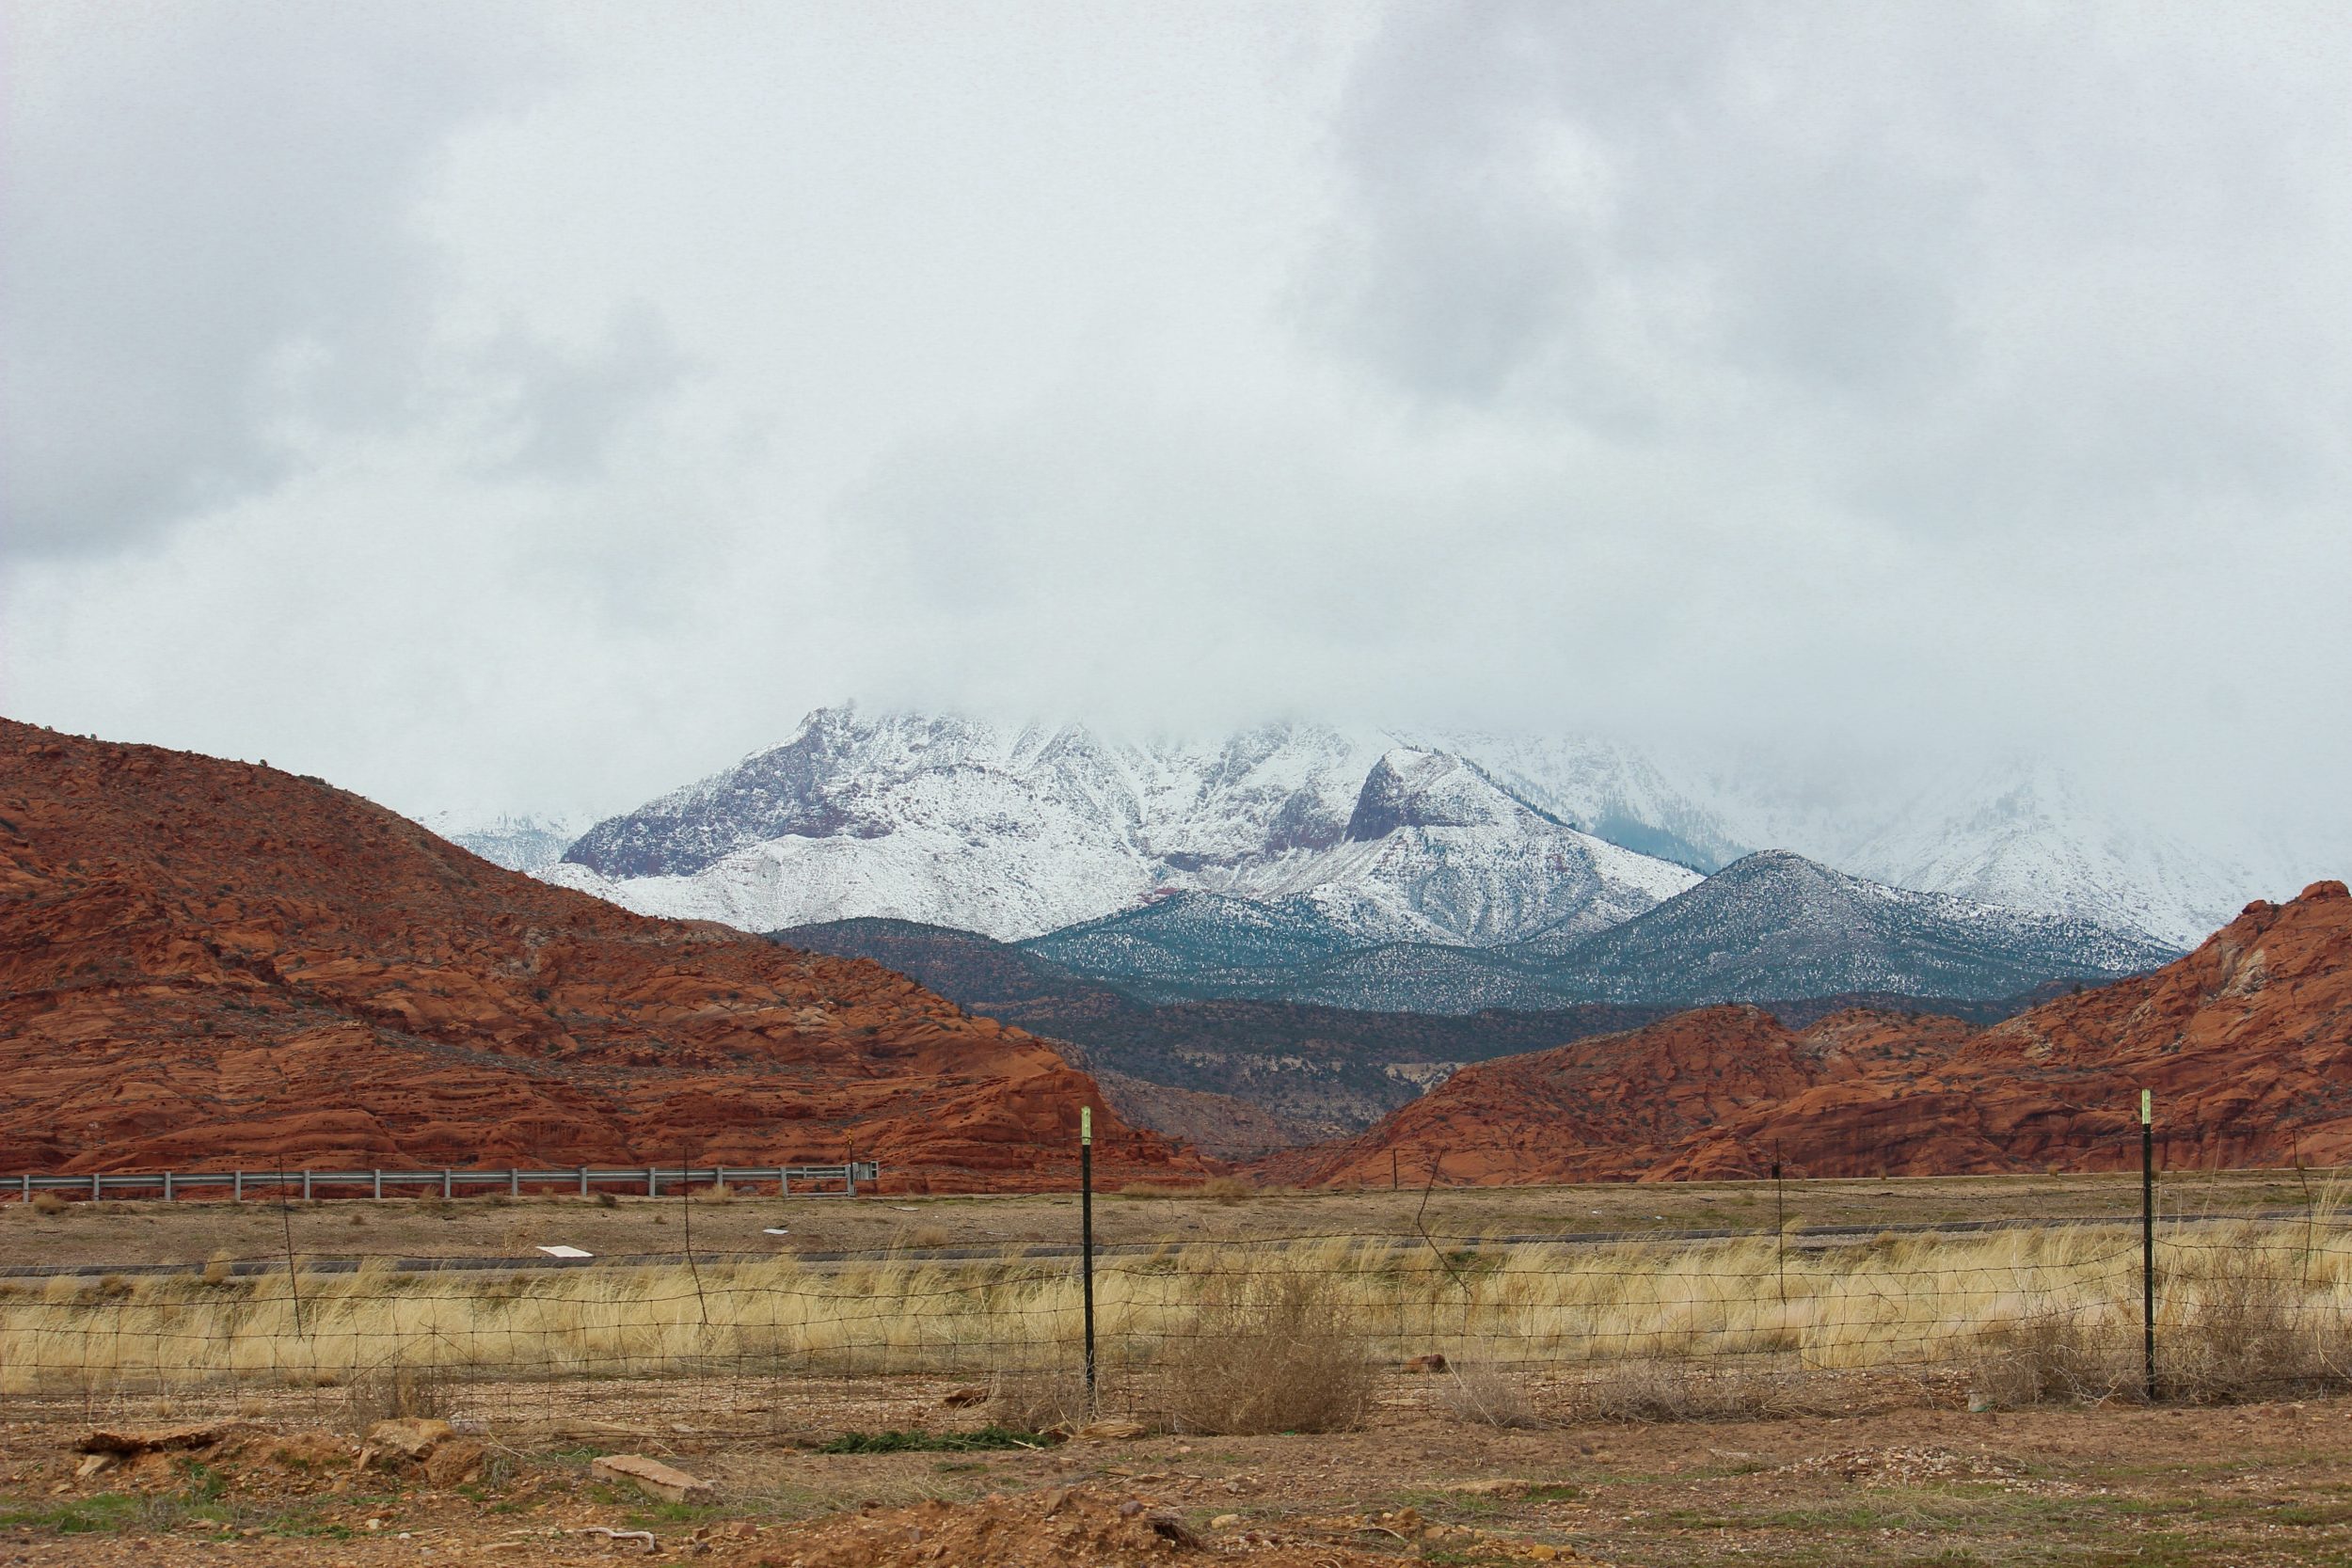 Even southern Utah’s wet winter weather won’t make a difference in the ongoing drought